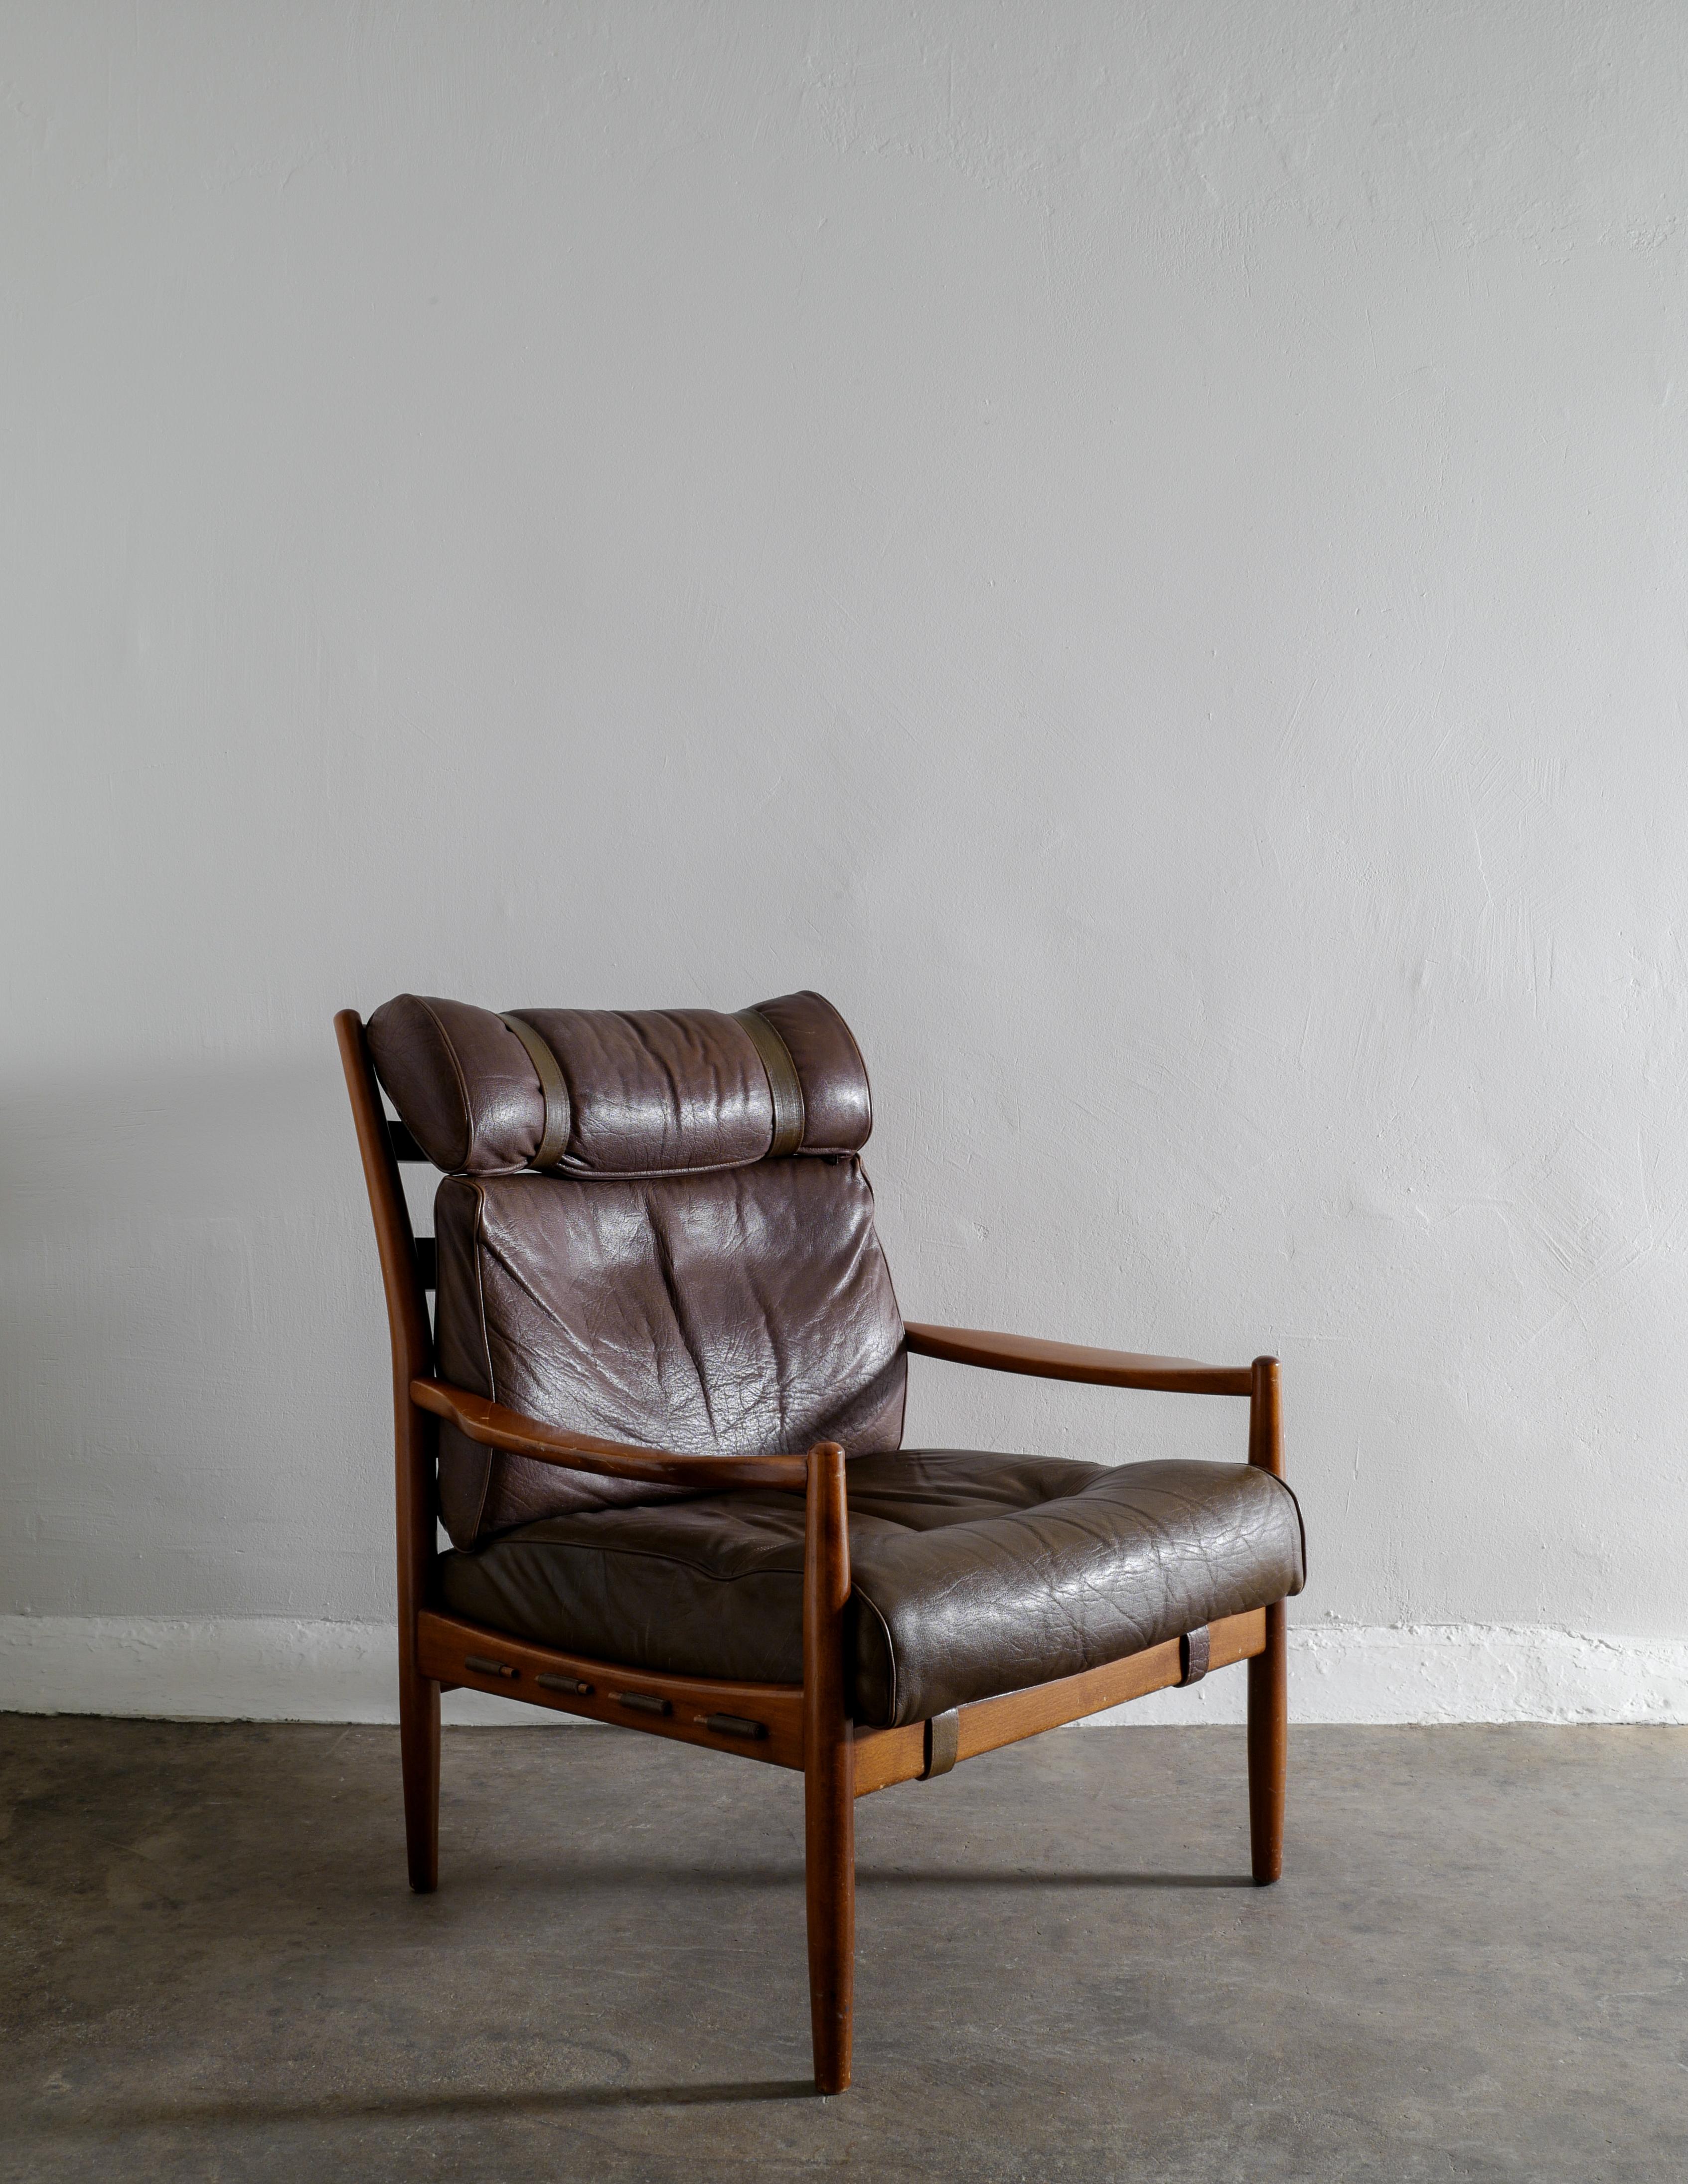 Rare Swedish armchair in buffalo leather and walnut designed by Ingemar Thillmark and produced by OPE Möbler in Sweden in the 1960s. In good vintage and original condition with some signs from age and use.  

Dimensions: H: 90 cm W: 74 cm D: 84 cm